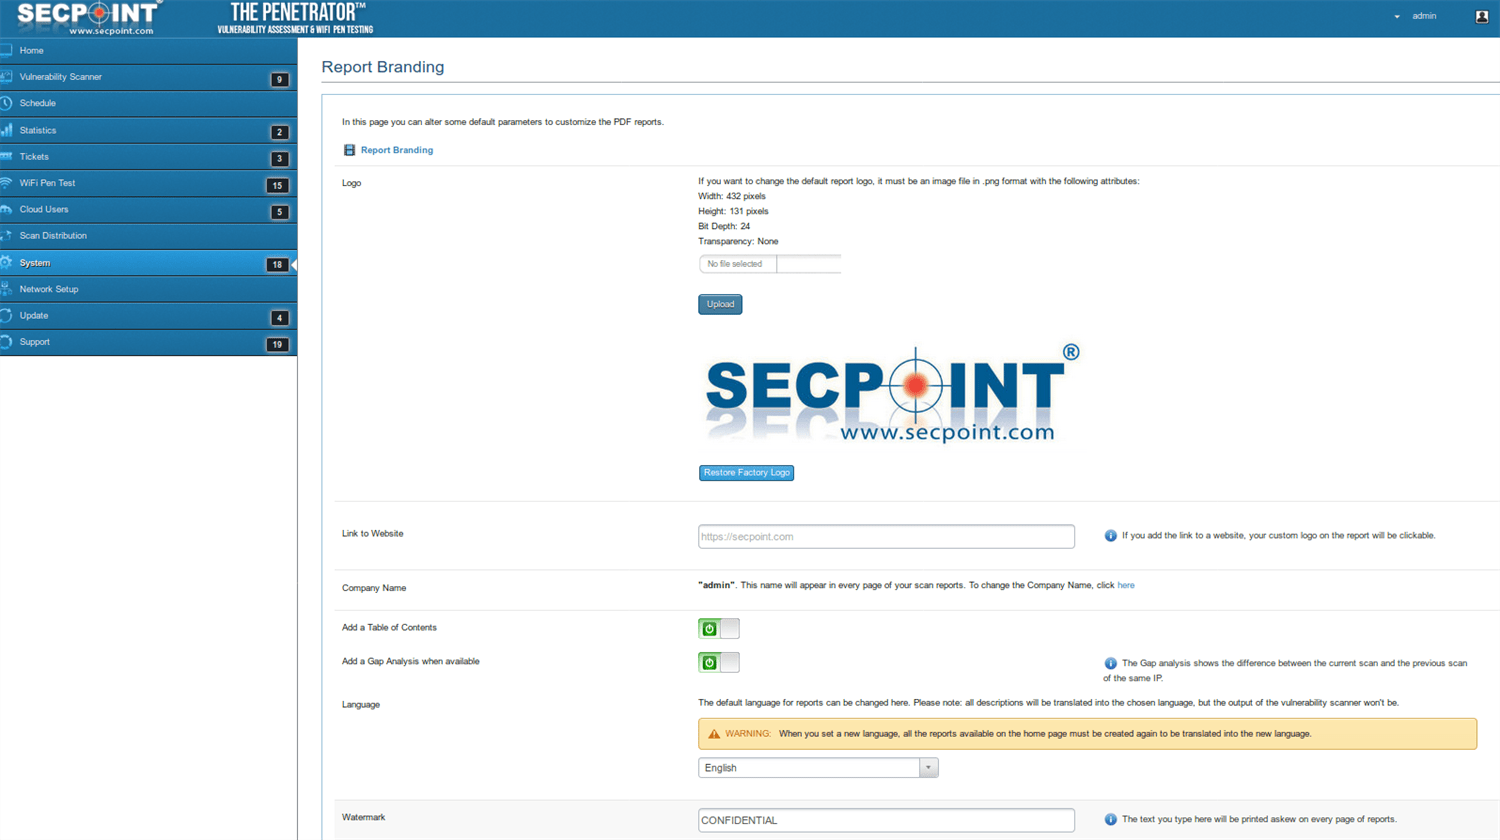 SecPoint Penetrator S9 - 2 IP Concurrent Scan License Security Assessment (3 Year License) - SecPoint